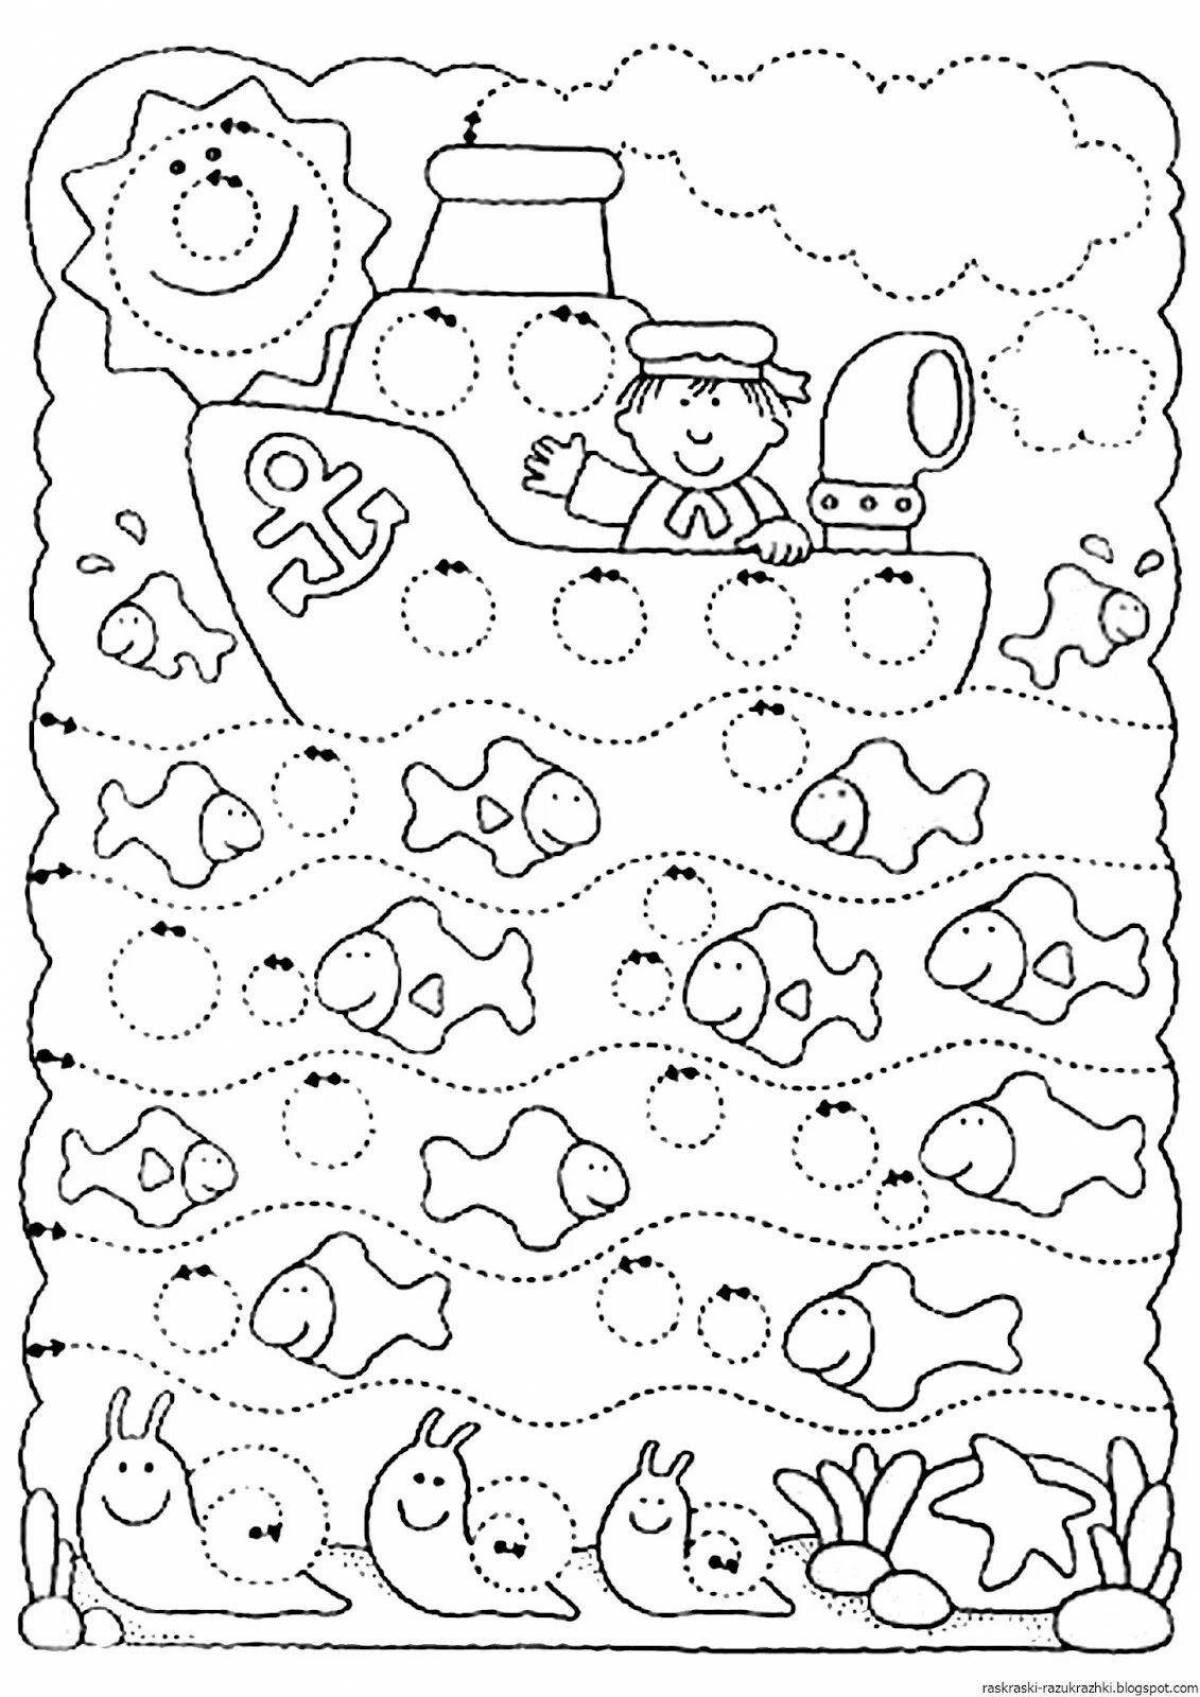 Fun coloring book to develop attention